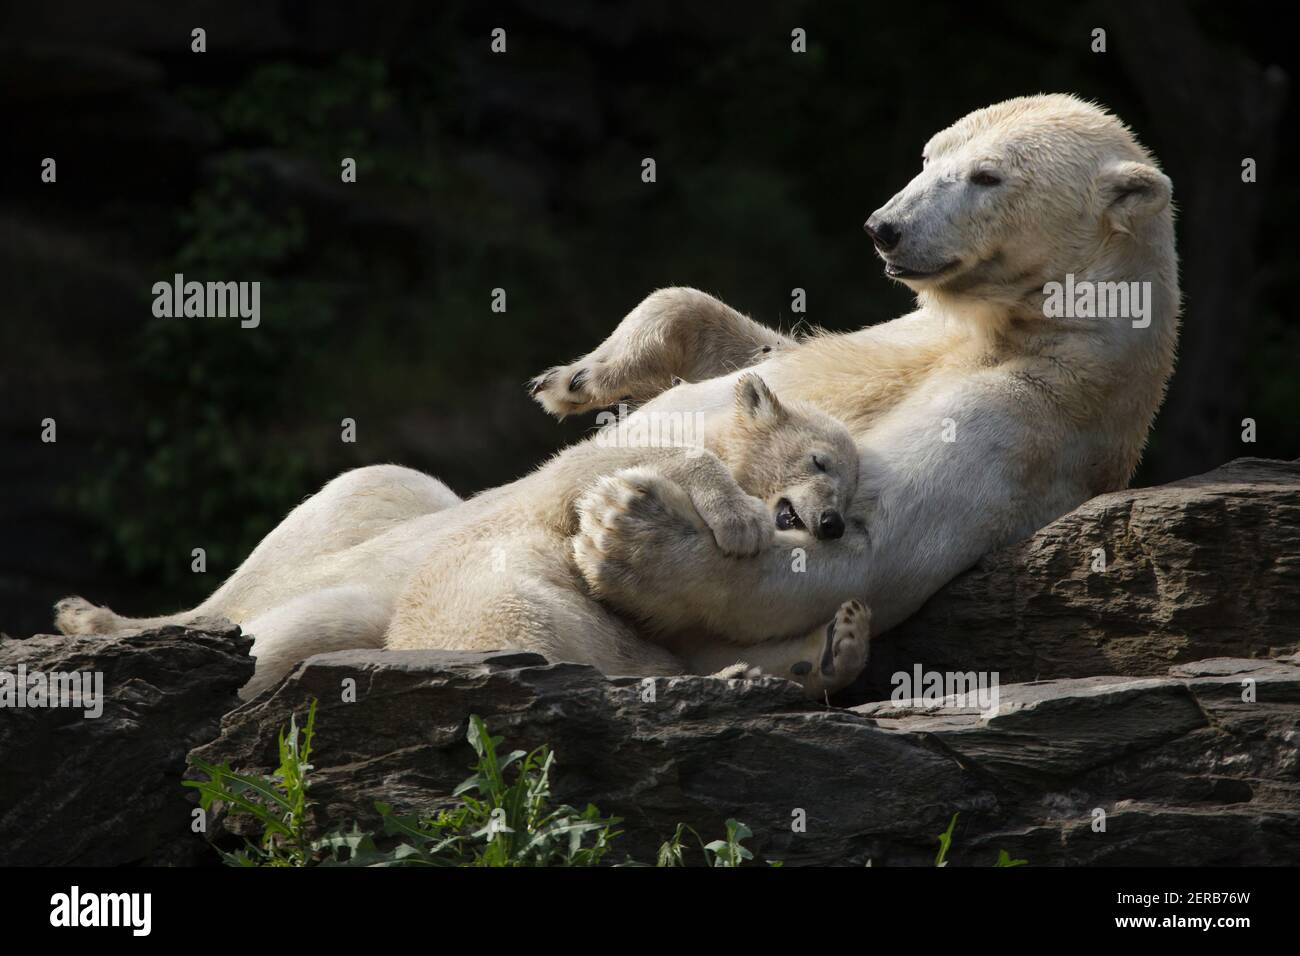 Polar bear (Ursus maritimus) with its cub at Tierpark Berlin in Berlin, Germany. Female polar bear Hertha was born on 1st December 2018 to her mother Tonja and father Wolodja. Stock Photo